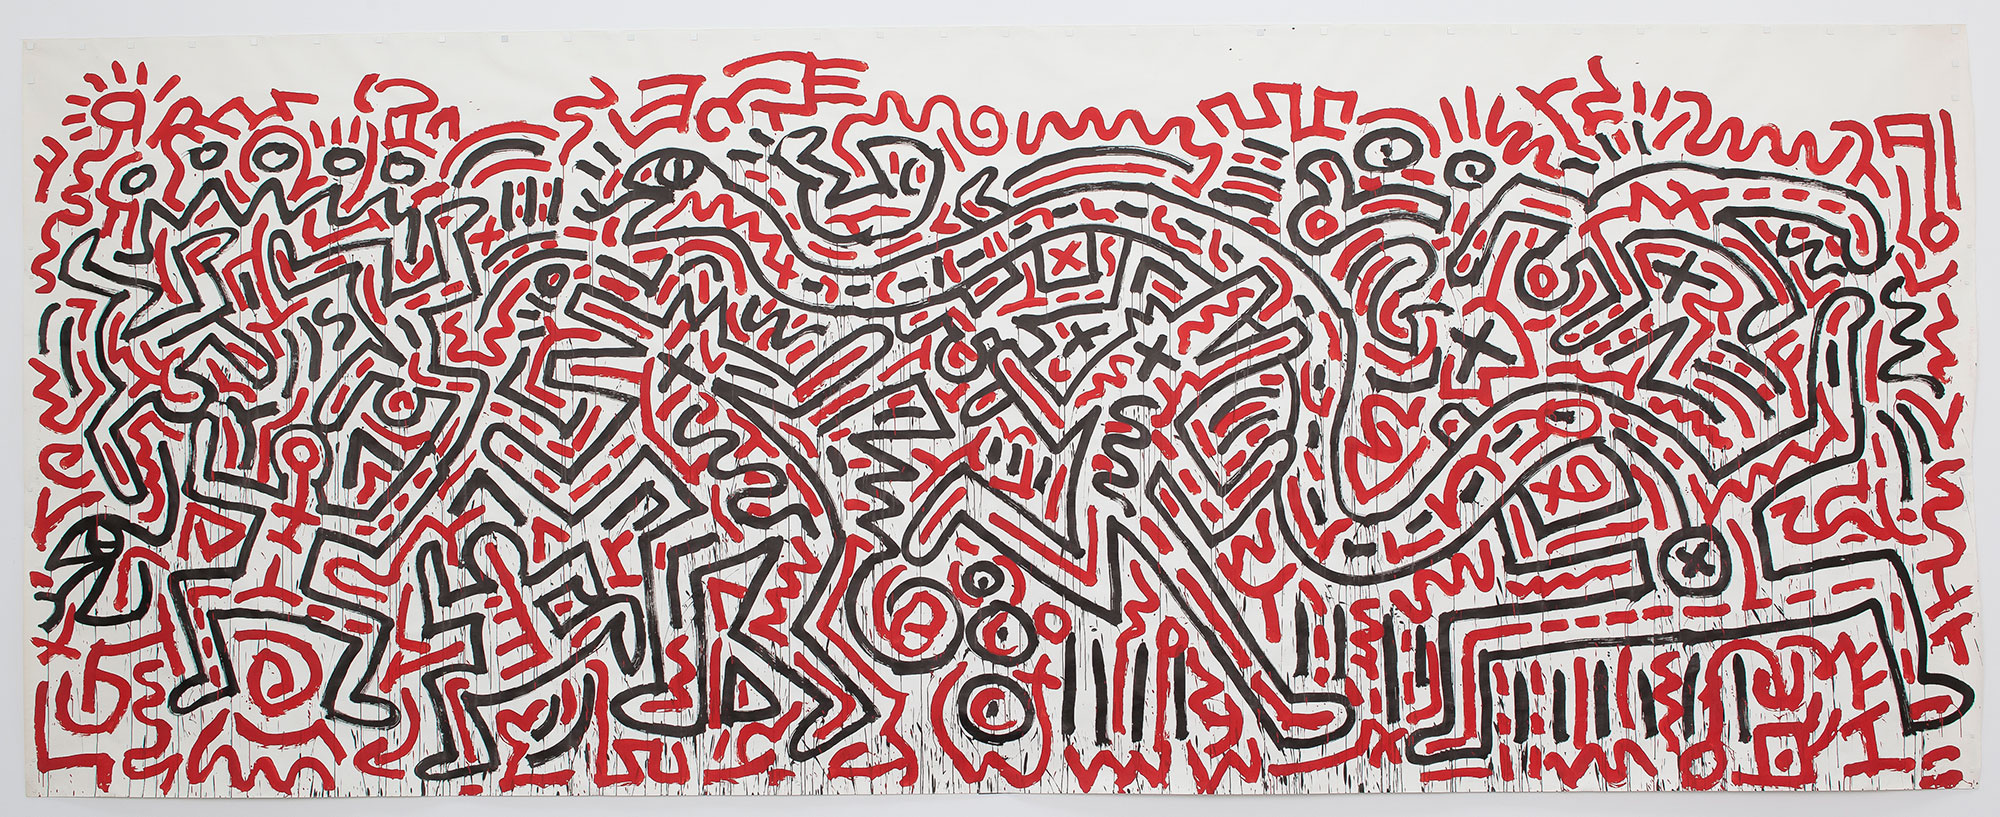 Keith Haring, Red, 1982–84.